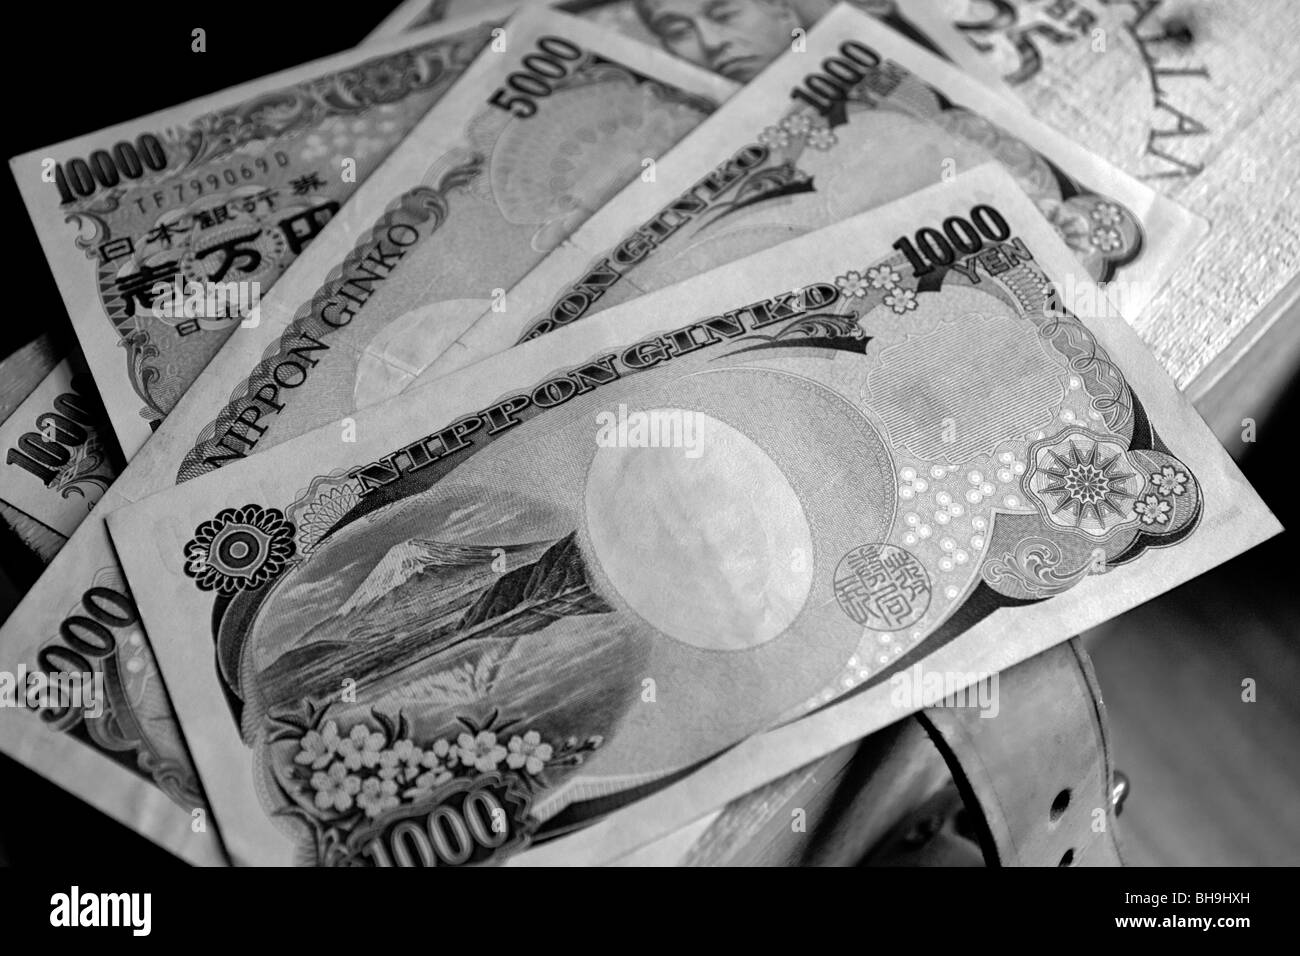 The national currency of Japan, Yen Notes. Stock Photo